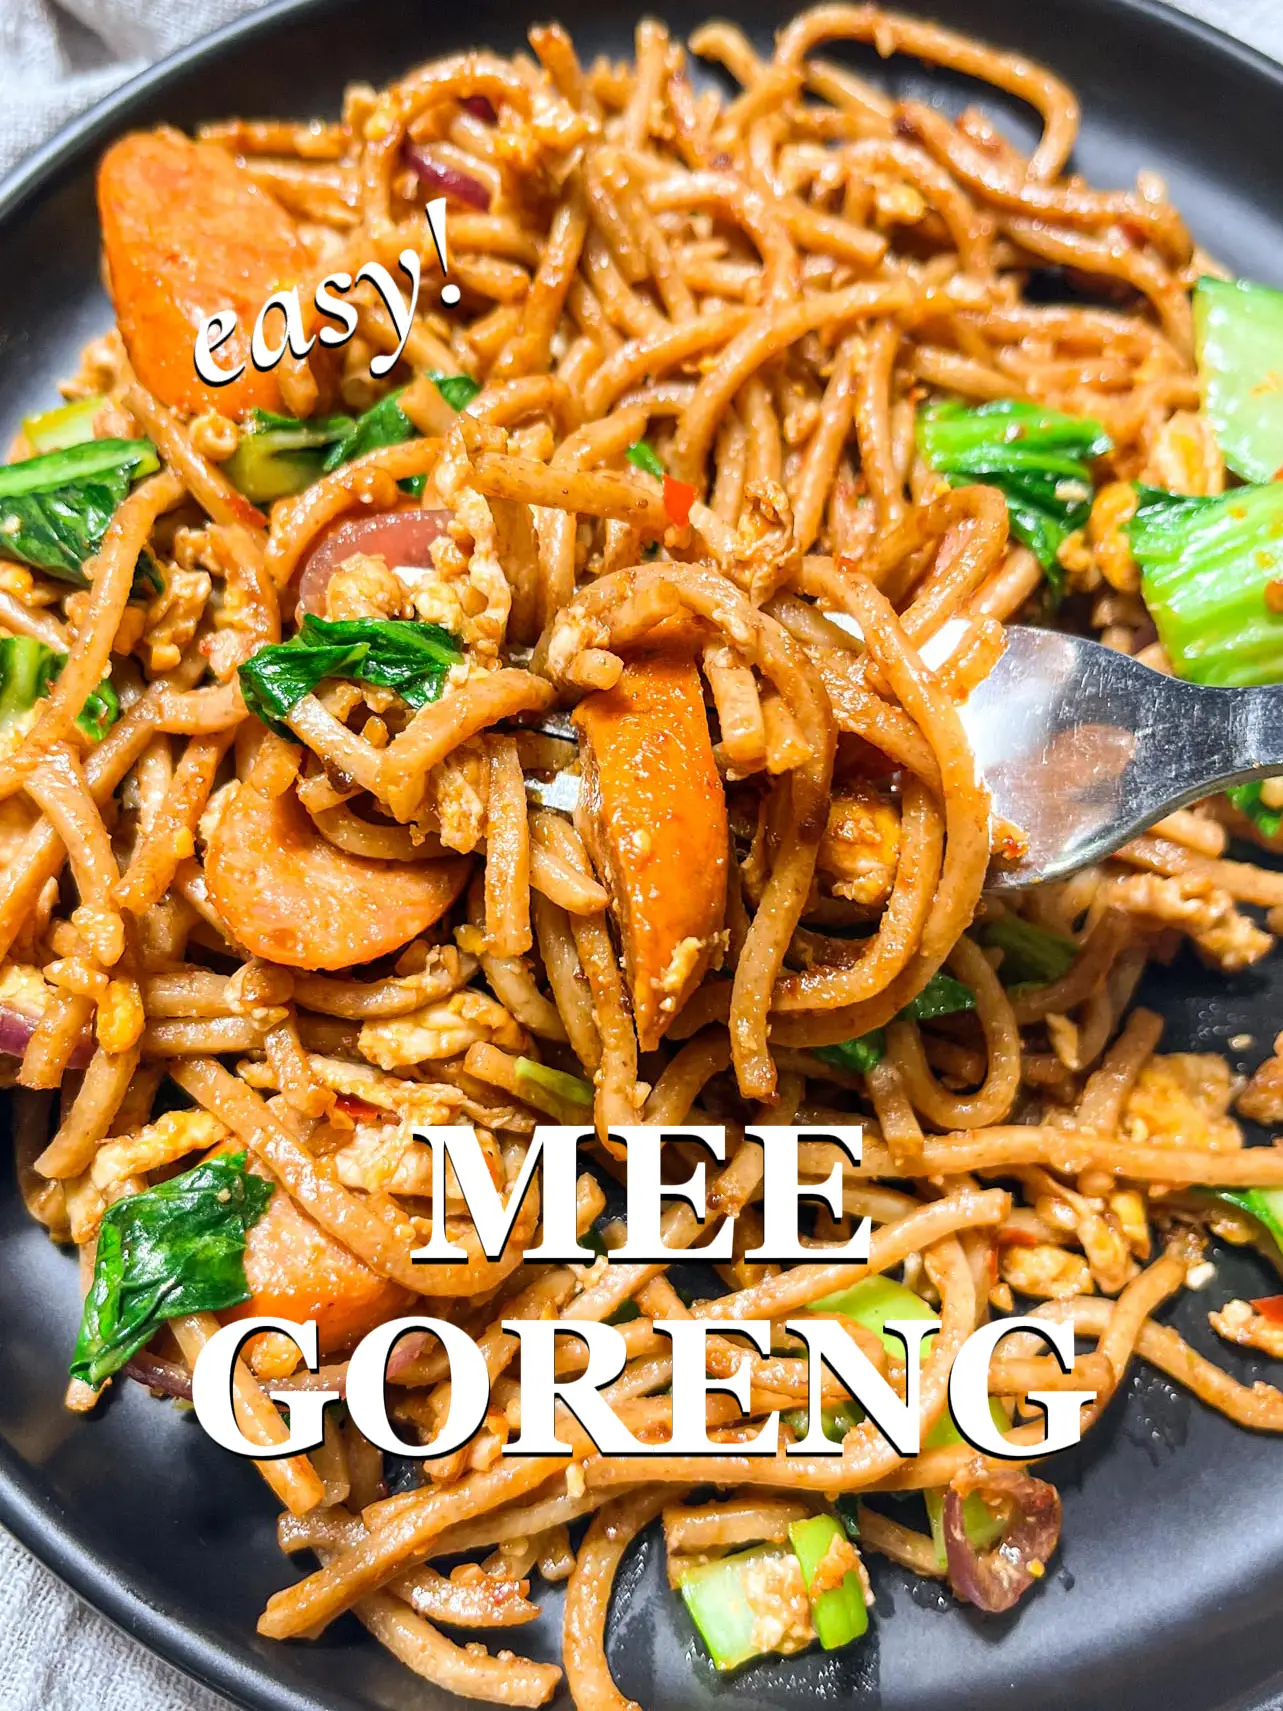 Mee Hoon Goreng (Malay-style Fried Vermicelli Noodles) - Hooked on Heat